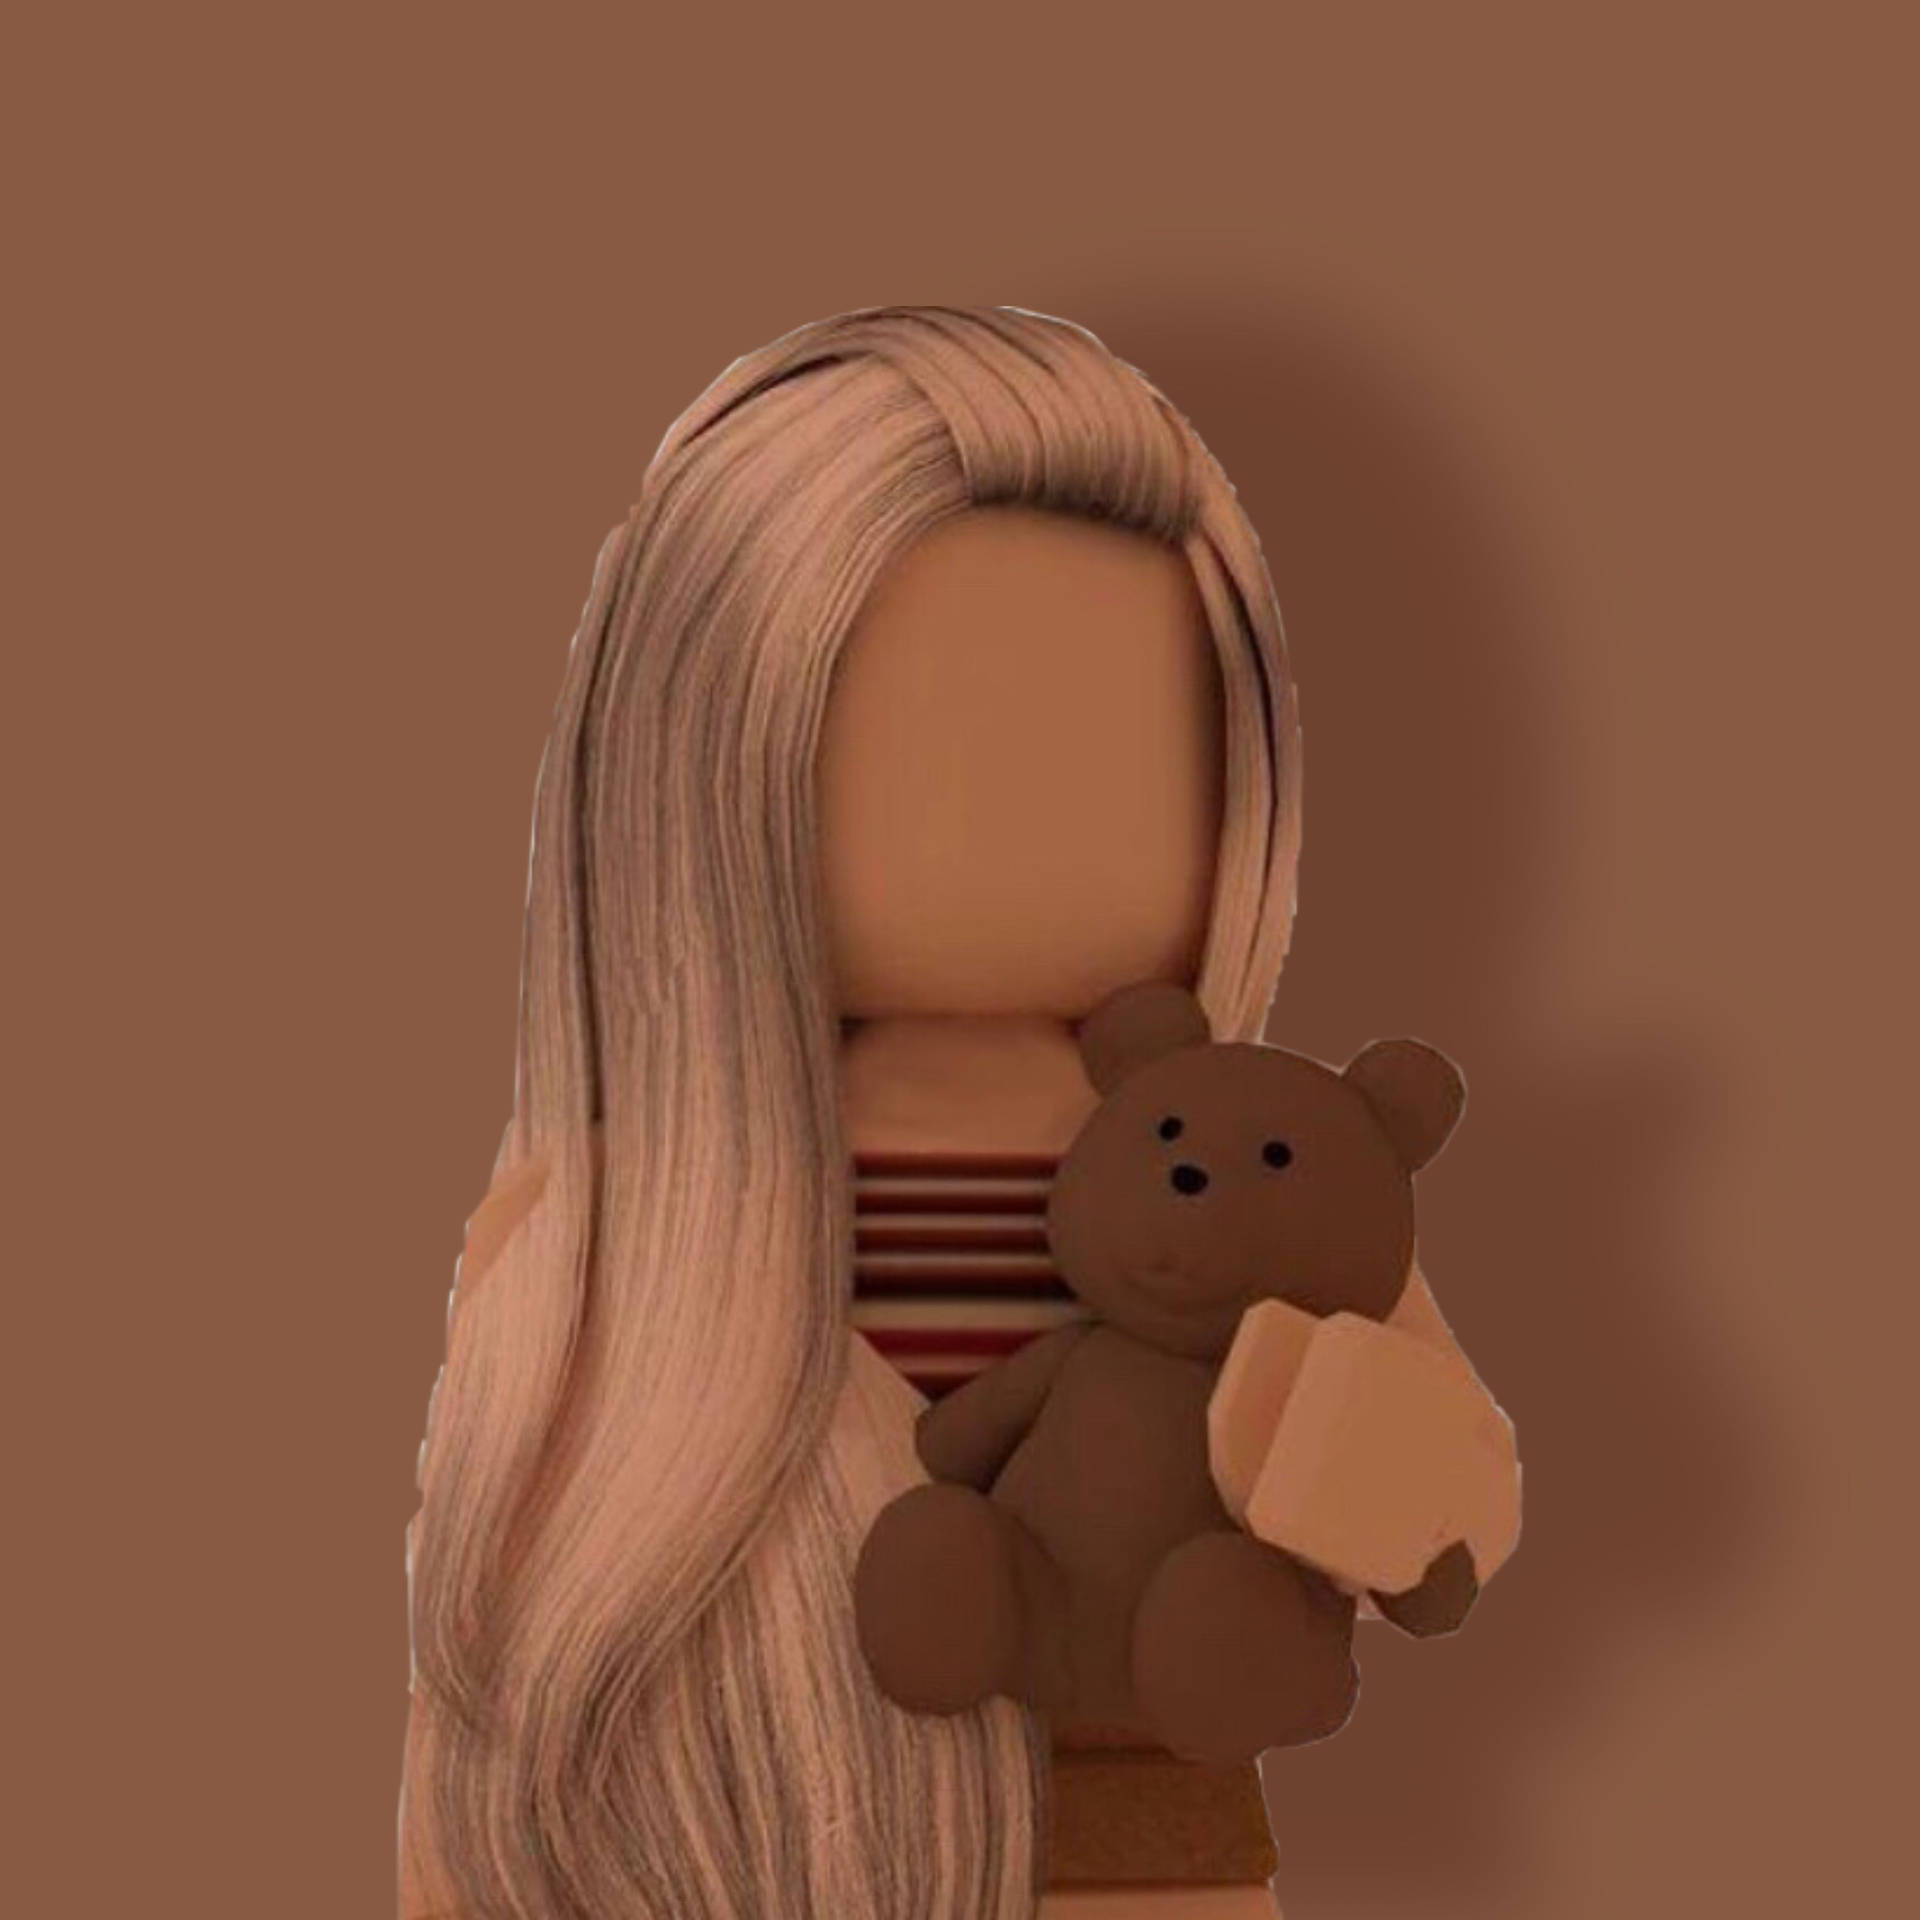 Aesthetic Roblox Girl With Brown Teddy Bear Wallpaper